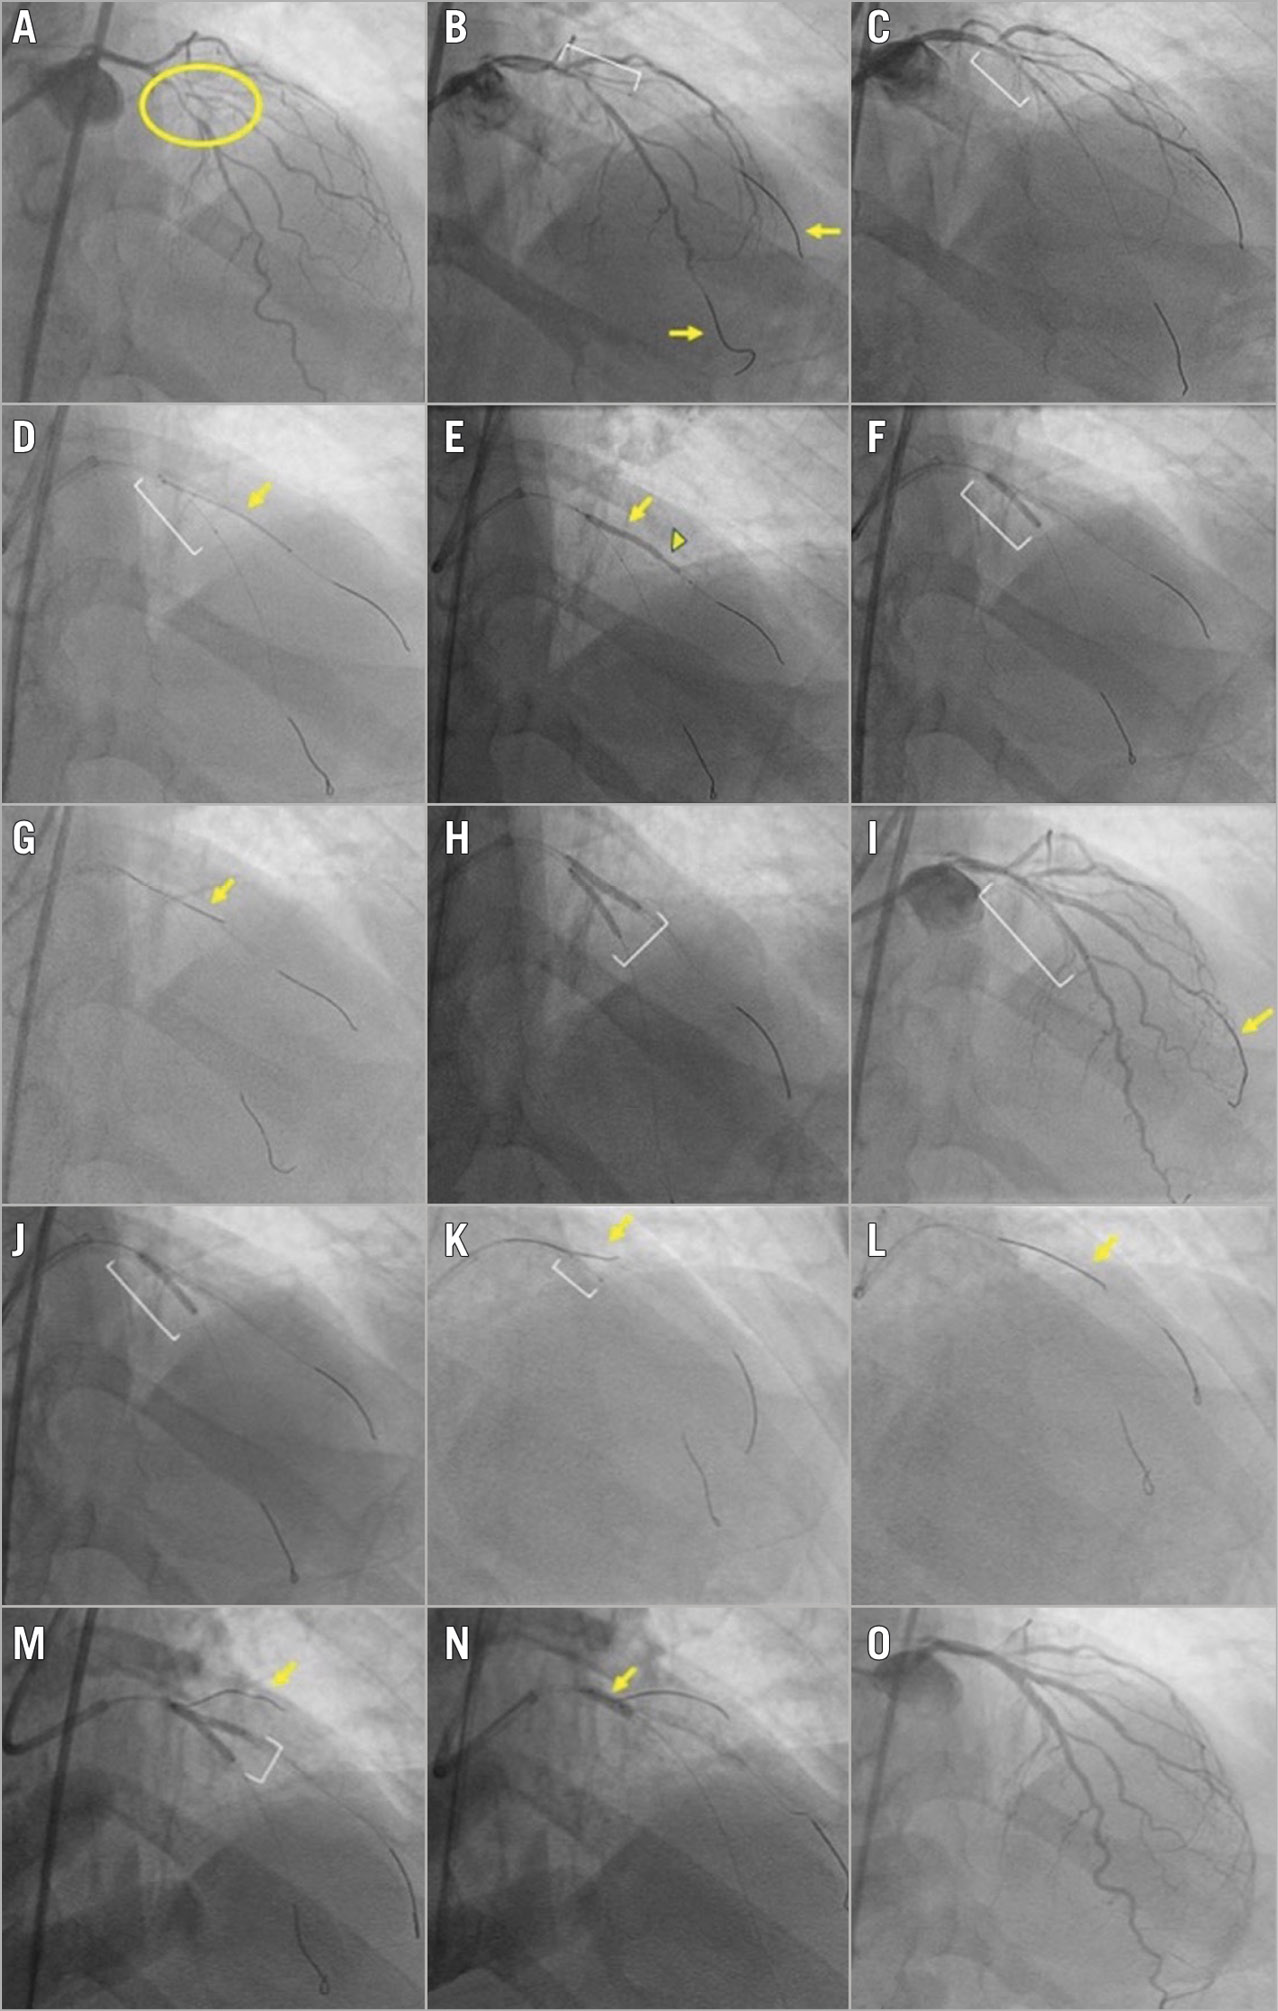 Figure 1. Angiographic case example of a bifurcation lesion treated successfully with the double kissing crush technique. A) Medina 1,1,1 bifurcation lesion (yellow circle) with significant disease involving the mid left anterior descending (LAD) artery and the bifurcating second diagonal branch. The bifurcation angle is <70°. The side branch supplies a large myocardial segment. B) Wires (yellow arrows) are placed in both the LAD (main vessel) and the diagonal branch (side branch). A balloon (white bracket) is placed in the diagonal branch for predilation. C) A balloon (white bracket) is placed in the LAD for predilation. D) A stent (yellow arrow) is positioned in the diagonal branch. A balloon (white bracket) is pre-positioned in the LAD prior to deploying the diagonal stent to allow subsequent crushing of the diagonal branch stent. E) The diagonal branch stent is deployed (yellow arrow). The angiographic result in the diagonal is optimised (for example to correct stent underexpansion indicated by arrowhead) prior to crushing the side branch stent. F) The LAD balloon (white bracket) is inflated, crushing the diagonal stent. G) A new wire (yellow arrow) is used to re-wire the crushed diagonal branch stent and the original diagonal wire is removed. H) The first simultaneous kissing balloon inflation (white bracket) is performed in the LAD and diagonal branch. I) The LAD stent is positioned (white bracket); the diagonal wire (yellow arrow) is not removed. J) The LAD stent (white bracket) is deployed, followed by proximal optimisation technique (POT) of the main vessel stent (not imaged). K) Due to difficulty re-wiring the diagonal branch, a Twin-Pass® Torque (Teleflex) dual-lumen microcatheter (white bracket) is used, with successful advancement of a new wire (yellow arrow) through the over-the-wire port of the device. L) The jailed diagonal wire (yellow arrow) is removed. M) The second simultaneous kissing balloon inflation (white bracket) is performed. A wire (yellow arrow) was placed in a more proximal first diagonal to maintain access to the vessel. N) Repeat POT is performed, with balloon inflation (yellow arrow) within the proximal main branch (LAD) stent up to the carina. O) Excellent final angiographic result.